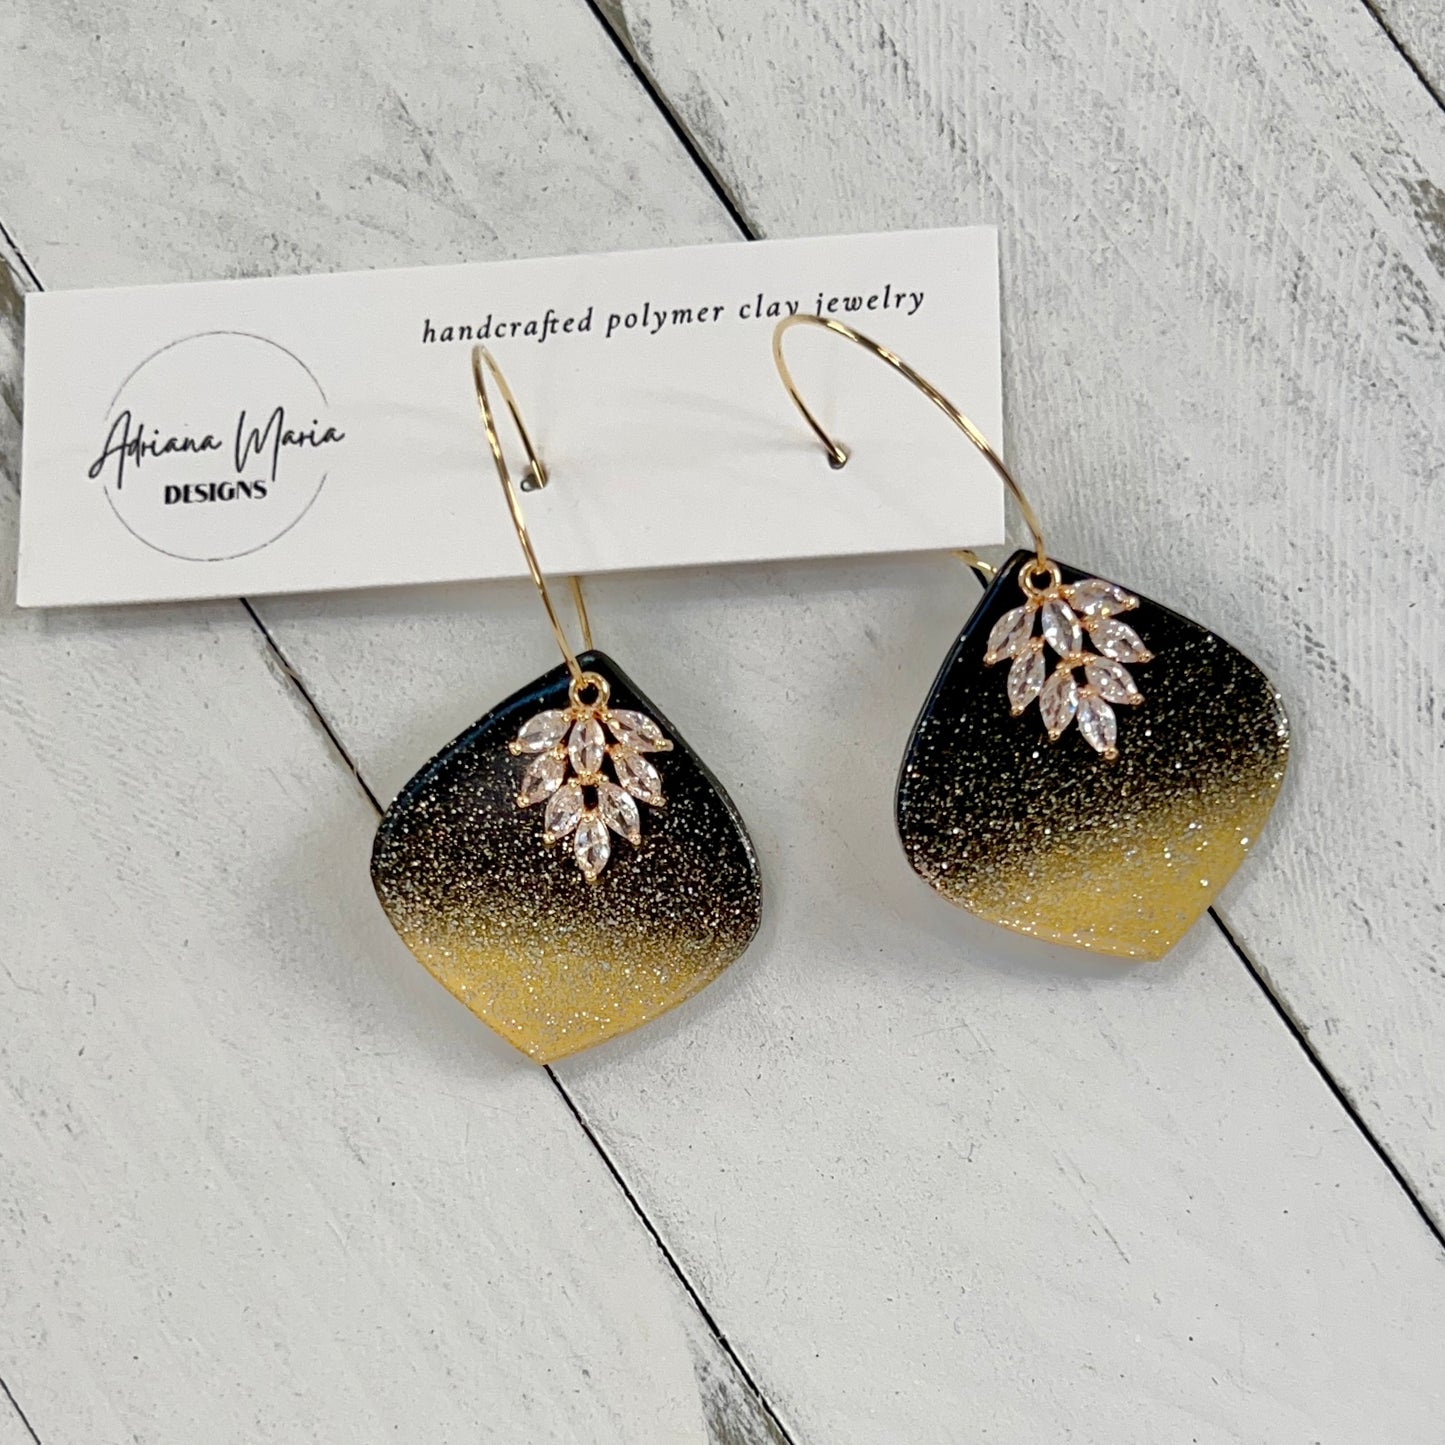 Black & Gold Polymer Clay Earrings